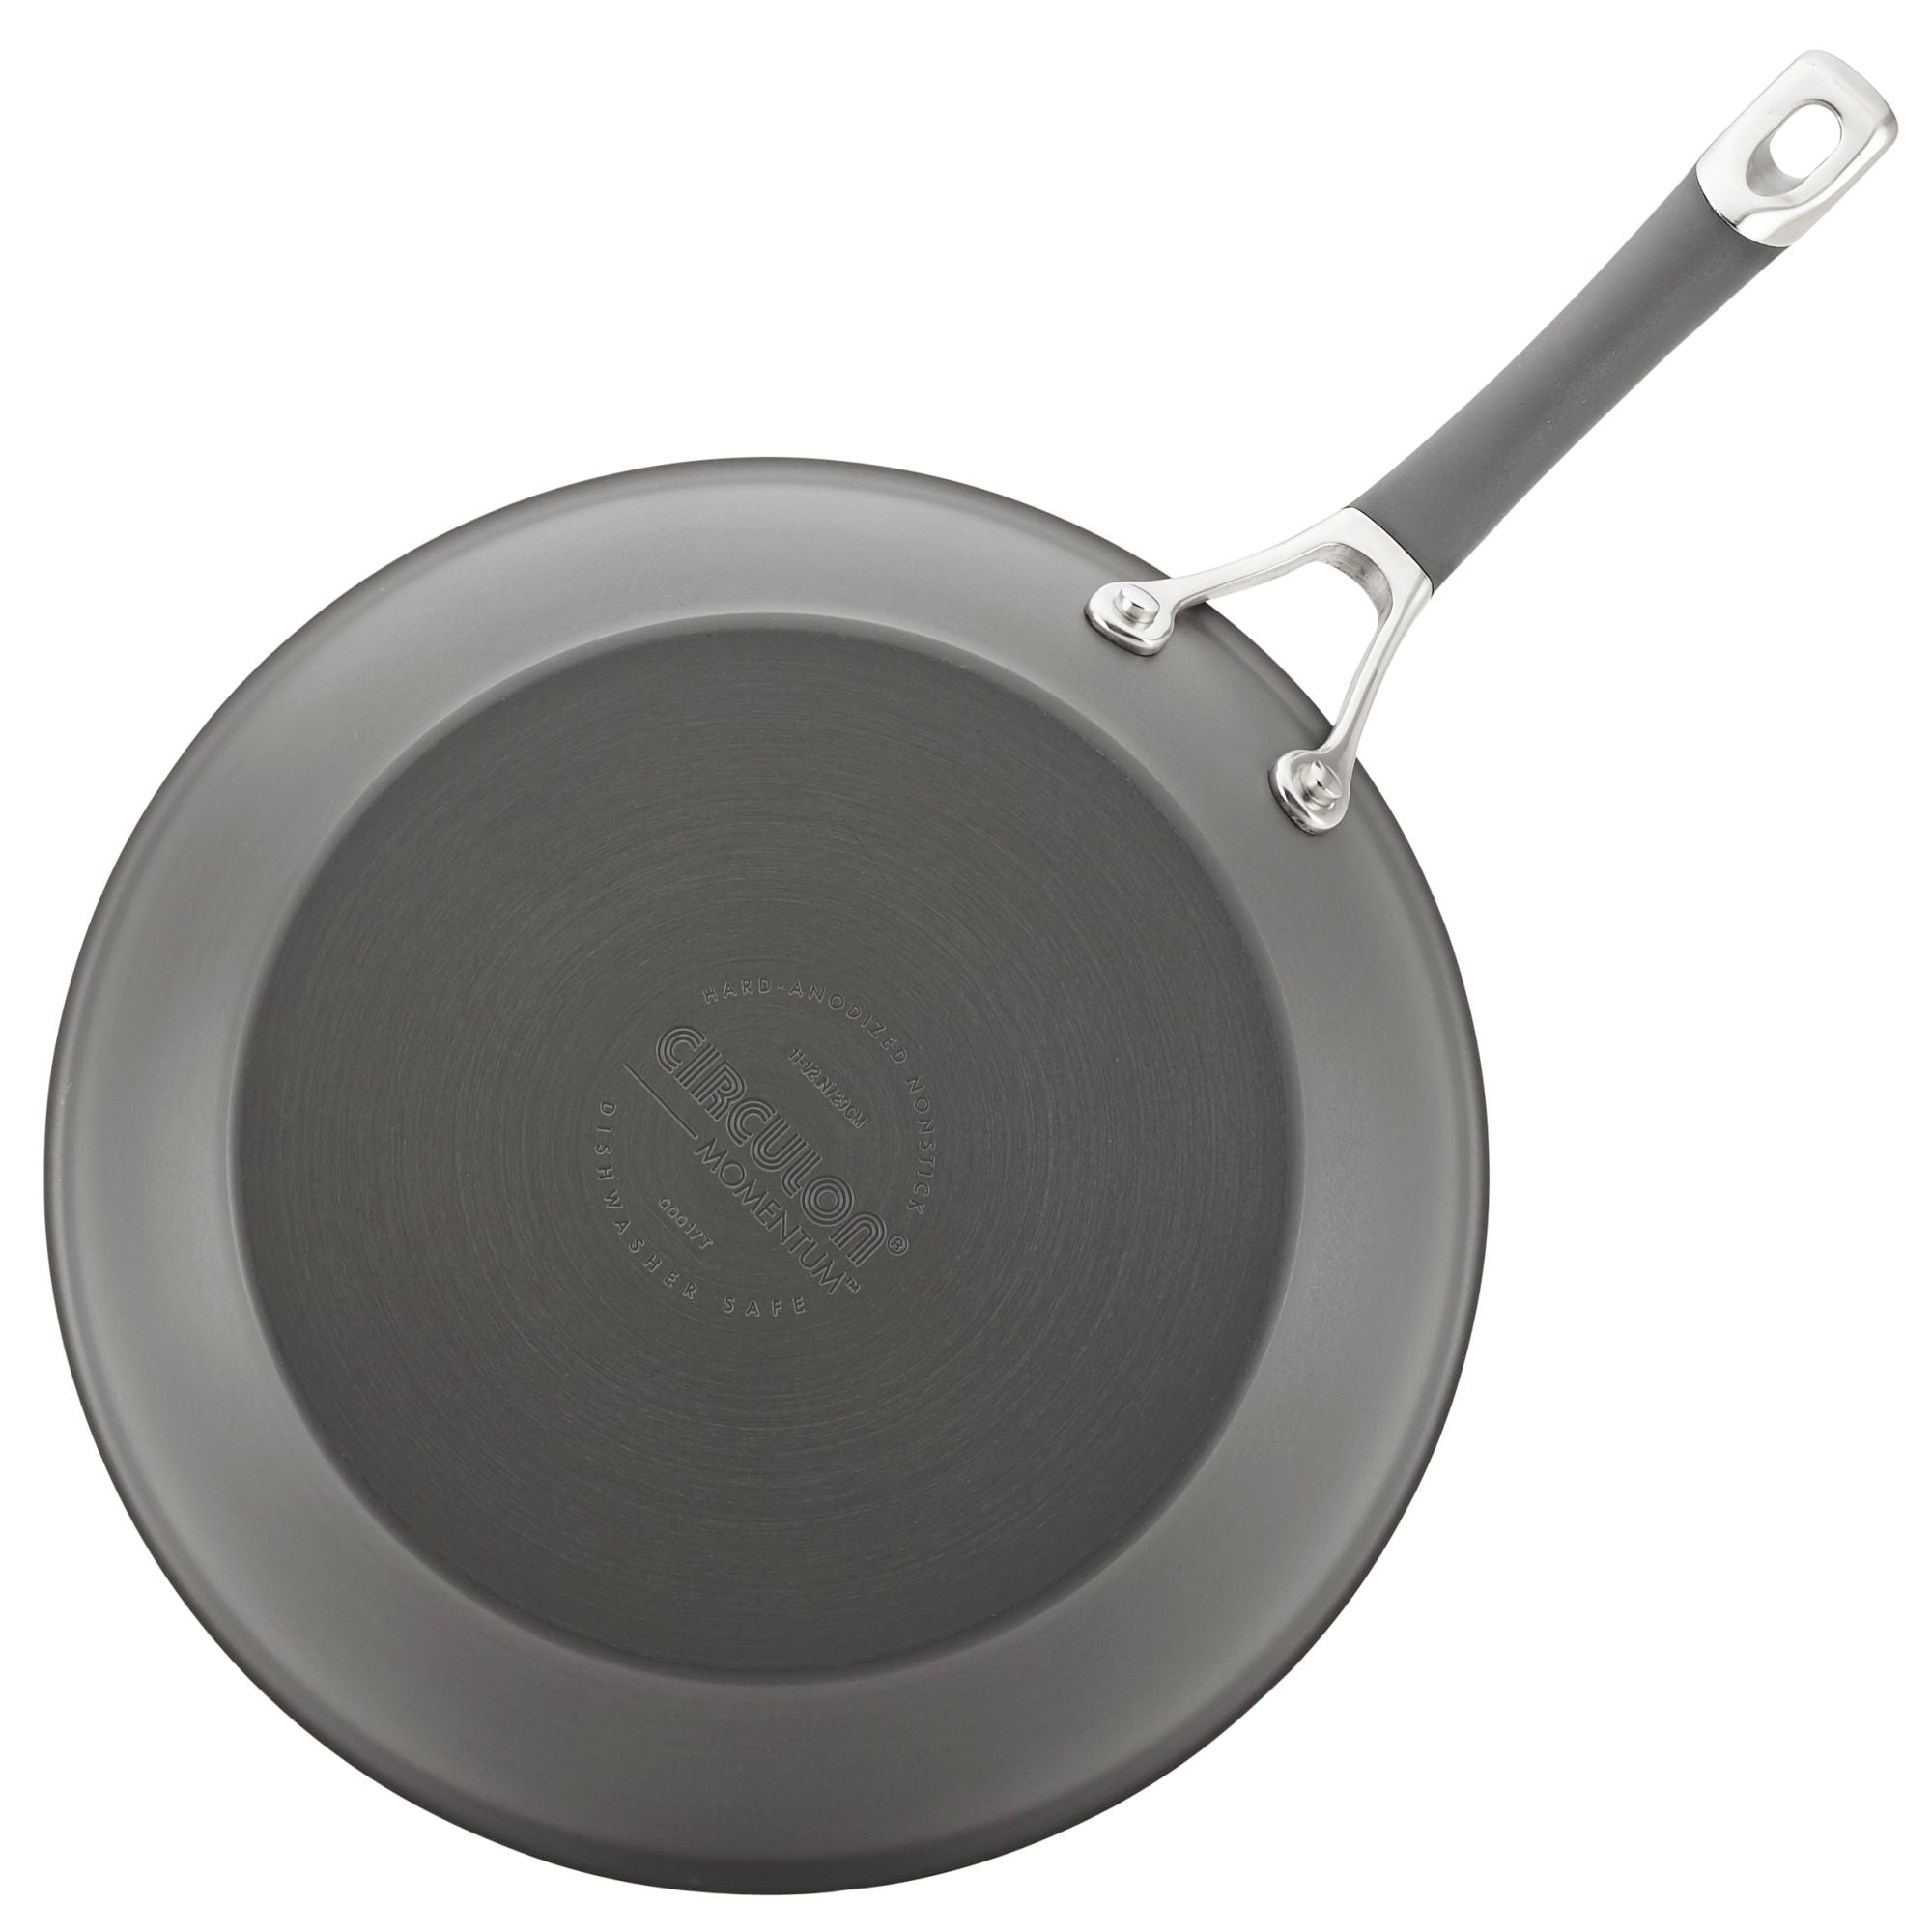 14 Non-stick Fry Pan, Made in USA